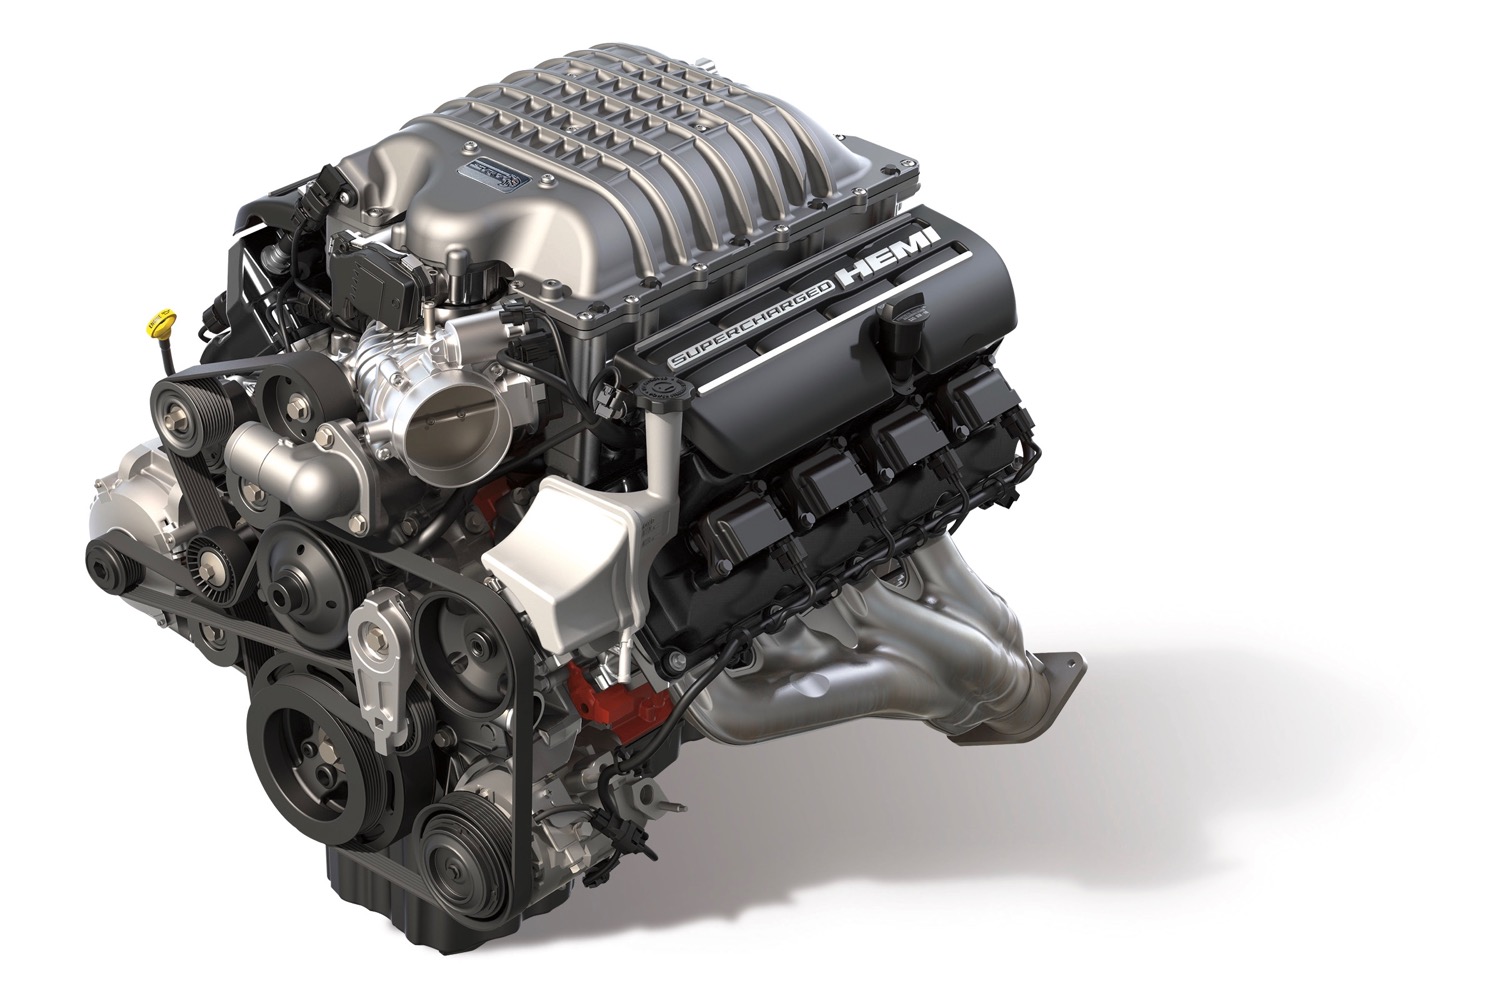 Give your car claws with the 807-horsepower Hellcat Redeye crate engine